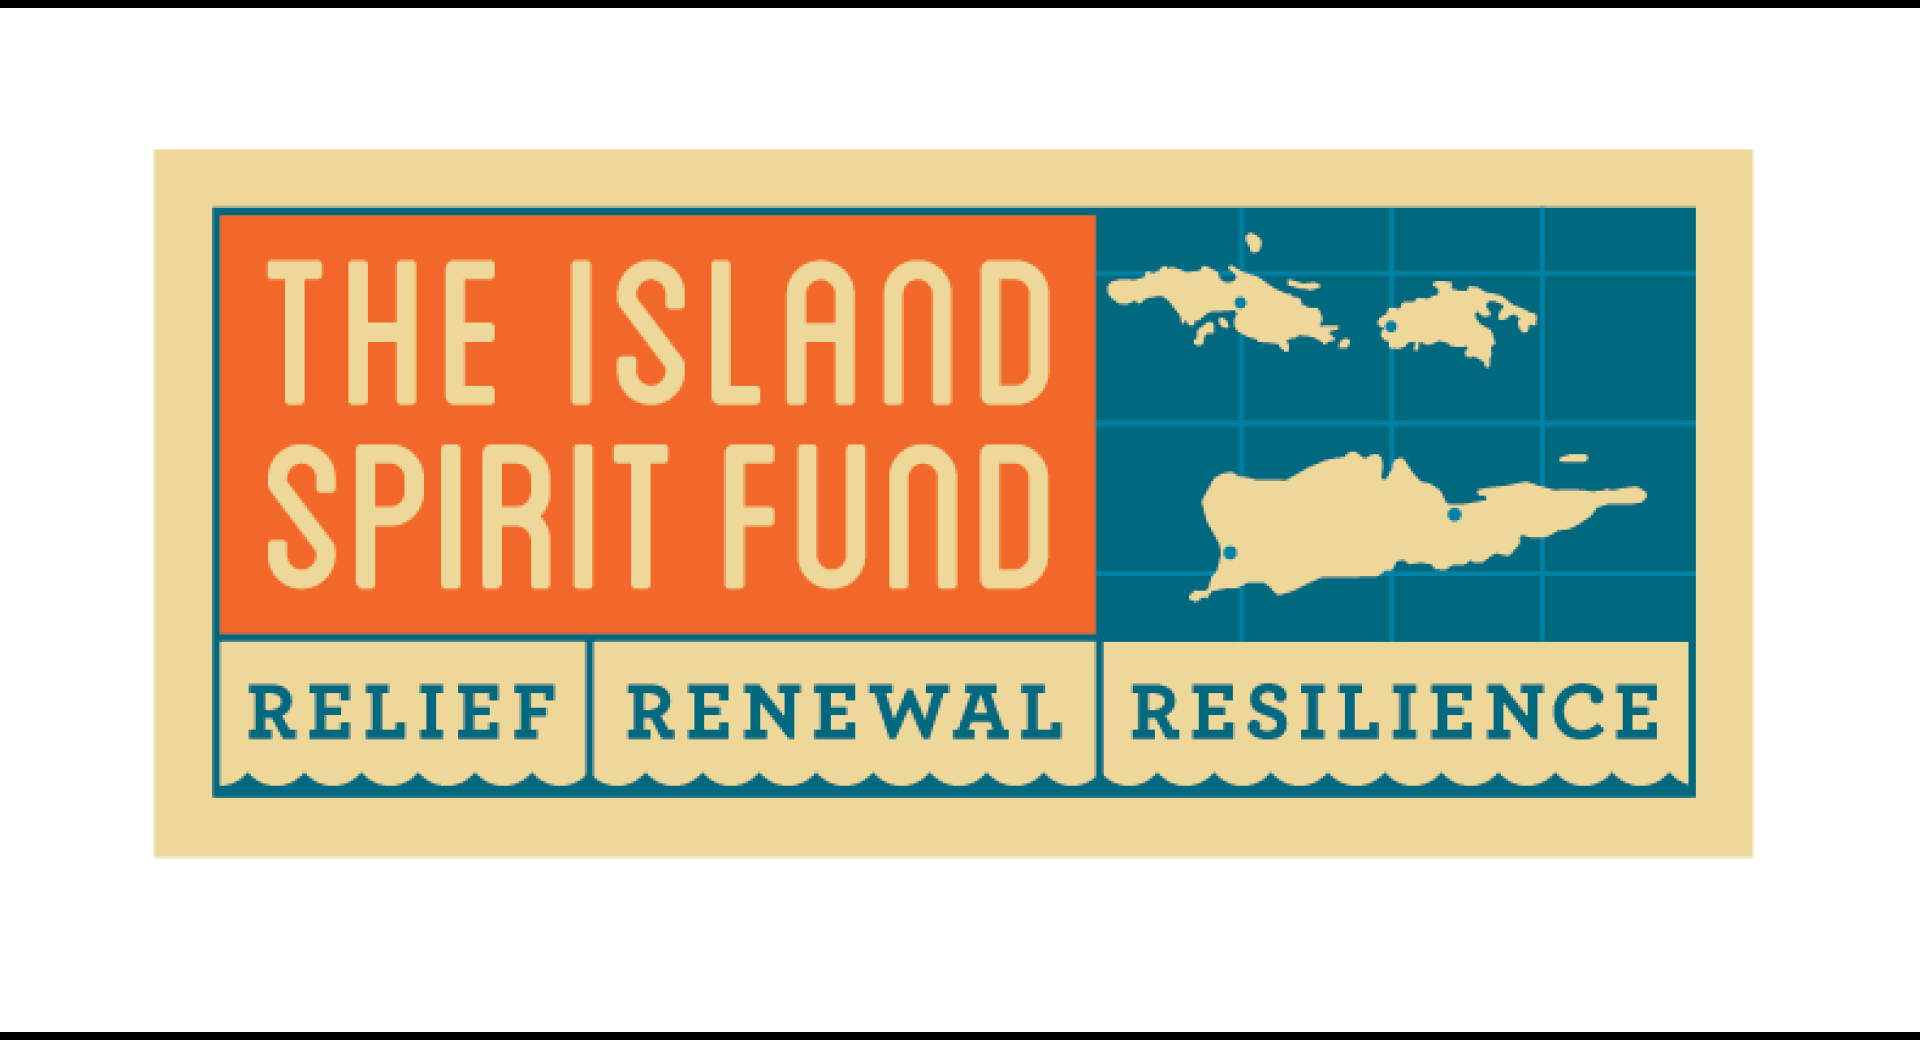 CFVI Partners with Cruzan Rum's Island Spirit Fund and GlobalGiving to Distribute more than $495,000 in Grants throughout the USVI